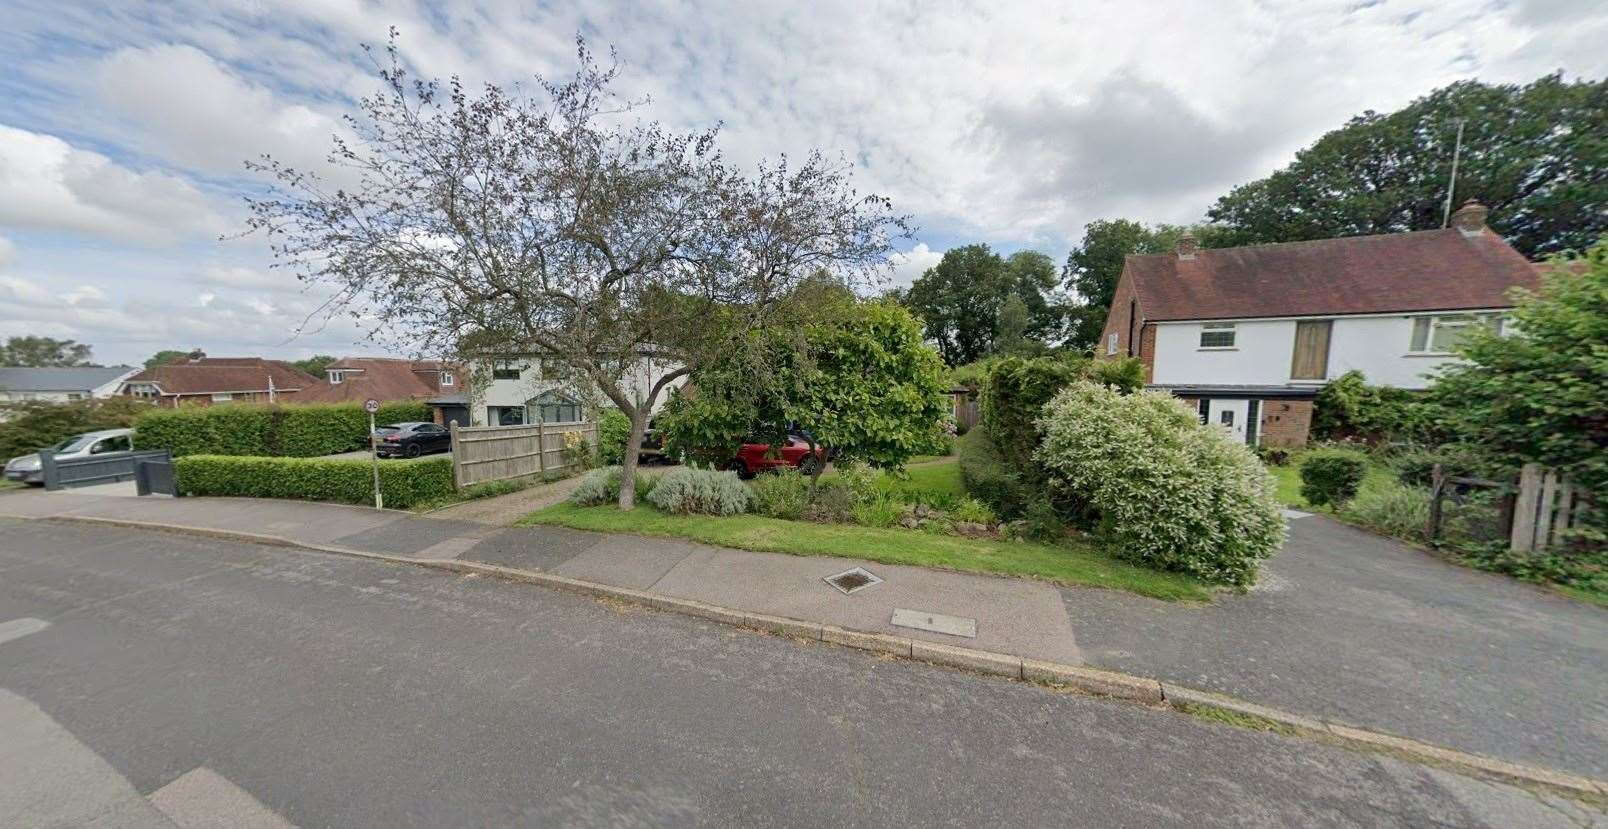 A man has appeared in court after a burglary in Dornden Drive, Tunbridge Wells over New Year. Picture: Google Street View